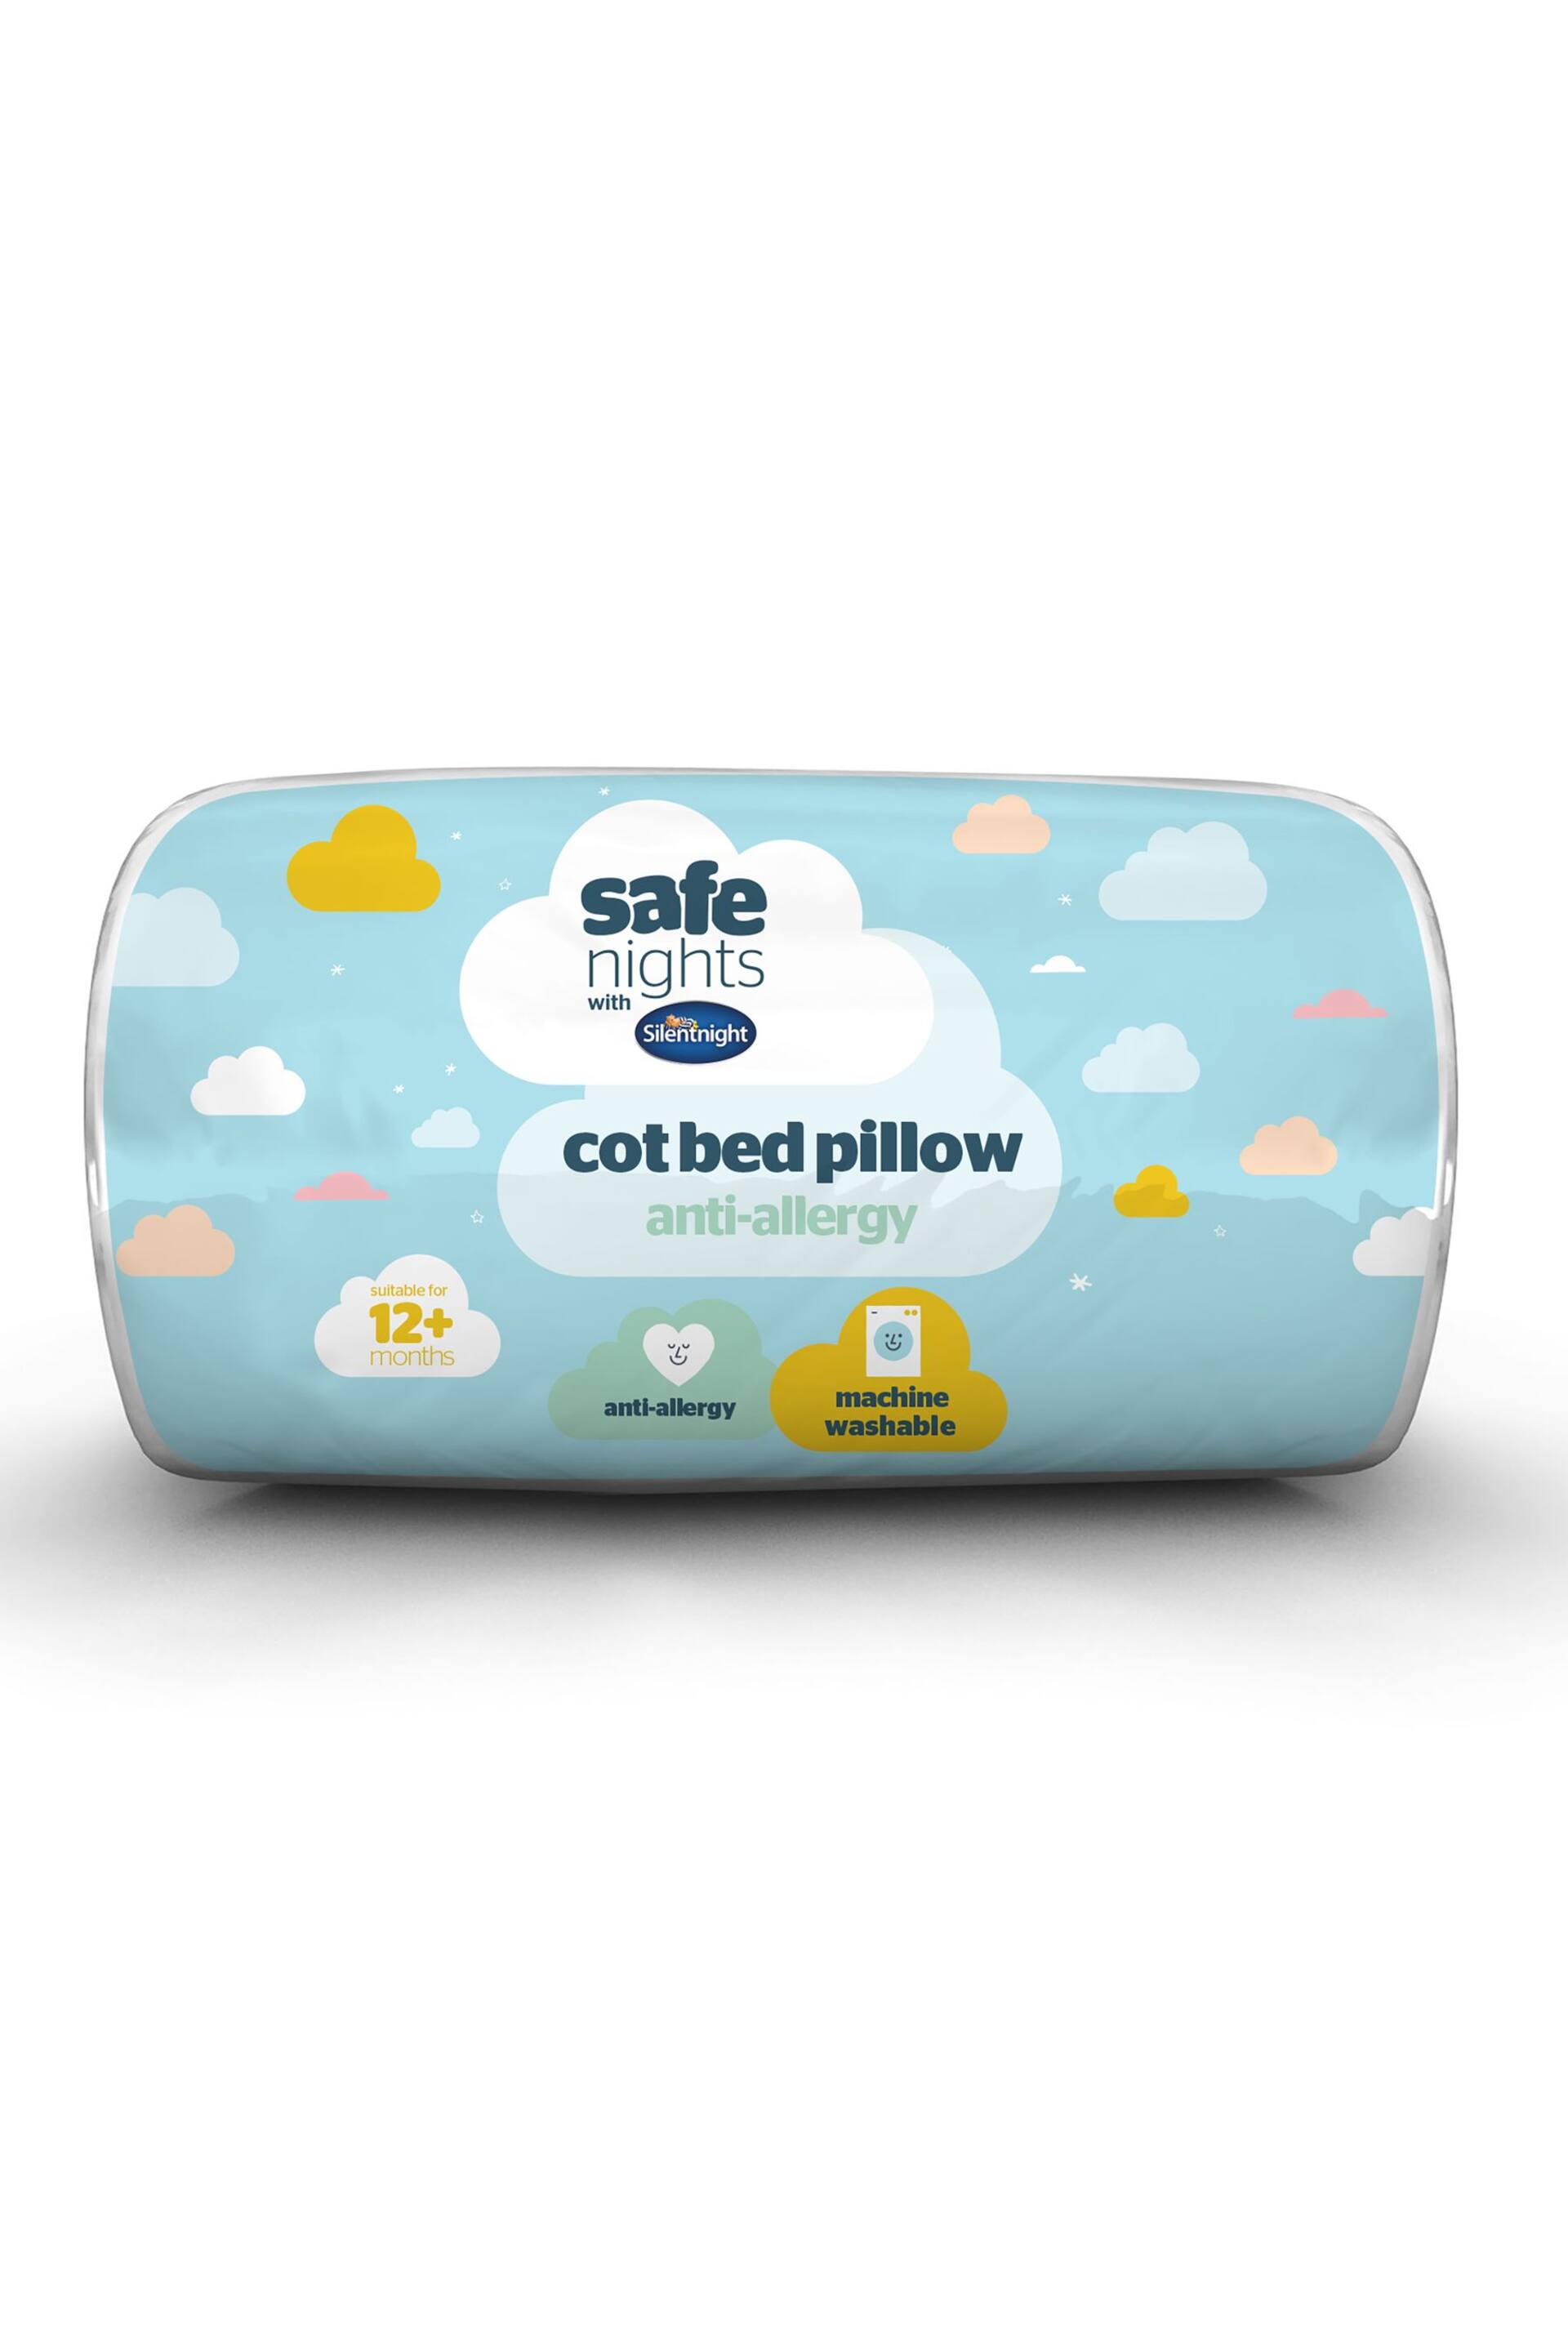 Silentnight Safe Nights Anti-Allergy Cot Bed Pillow - Image 11 of 11